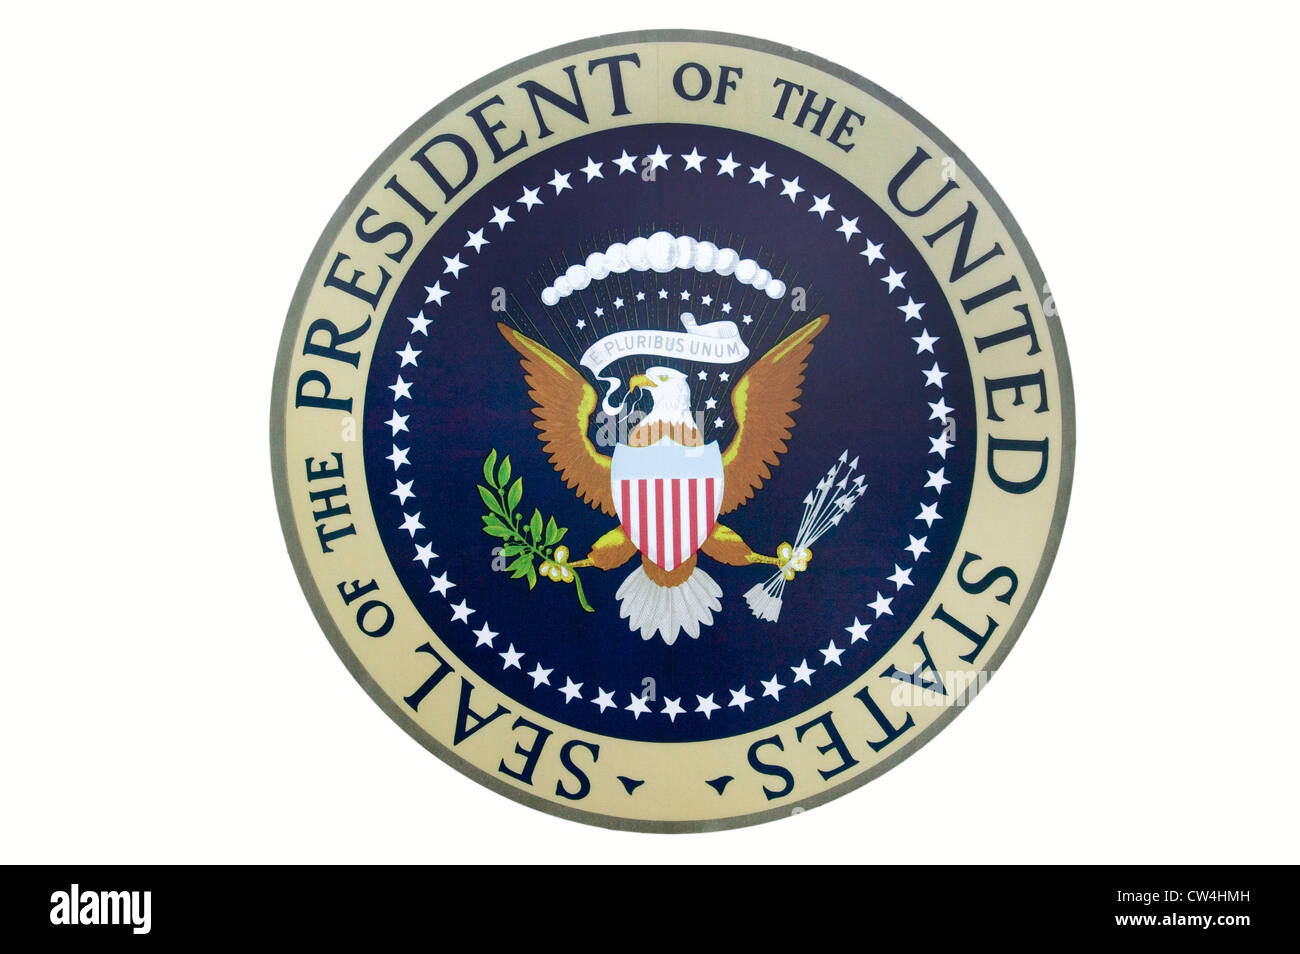 Seal of the President of the United States on display at the Ronald Reagan Presidential Library and Museum, Simi Valley, CA Stock Photo